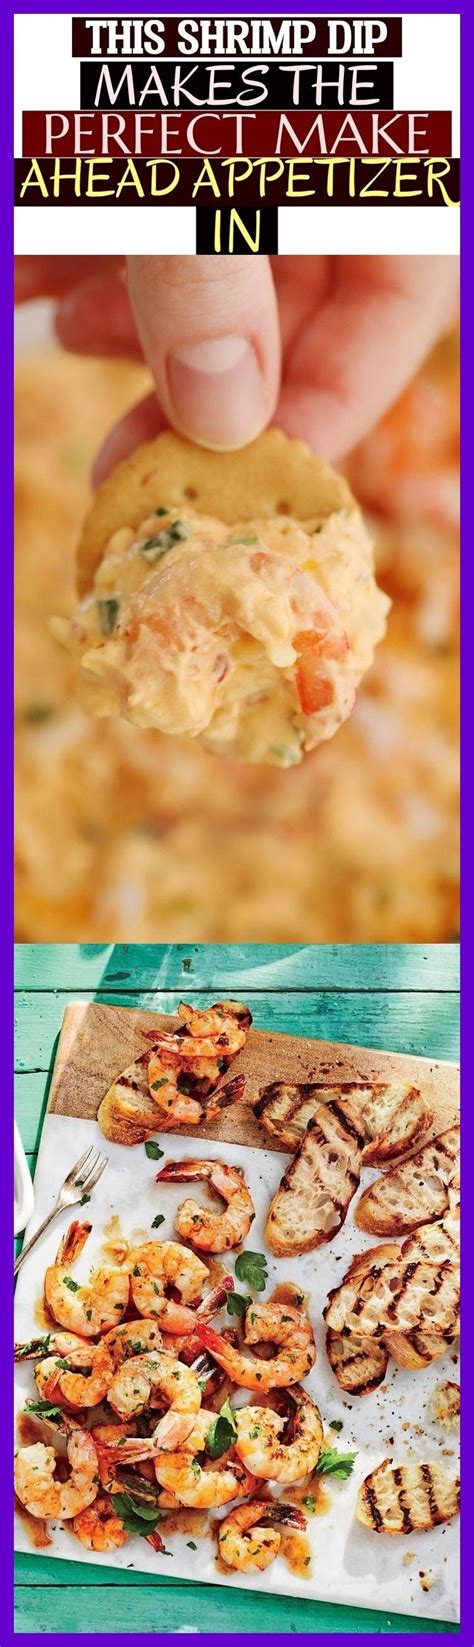 Make them ahead and freeze up to 1 month in airtight freezer bags. This Shrimp Dip Makes The Perfect Make Ahead Appetizer In ...